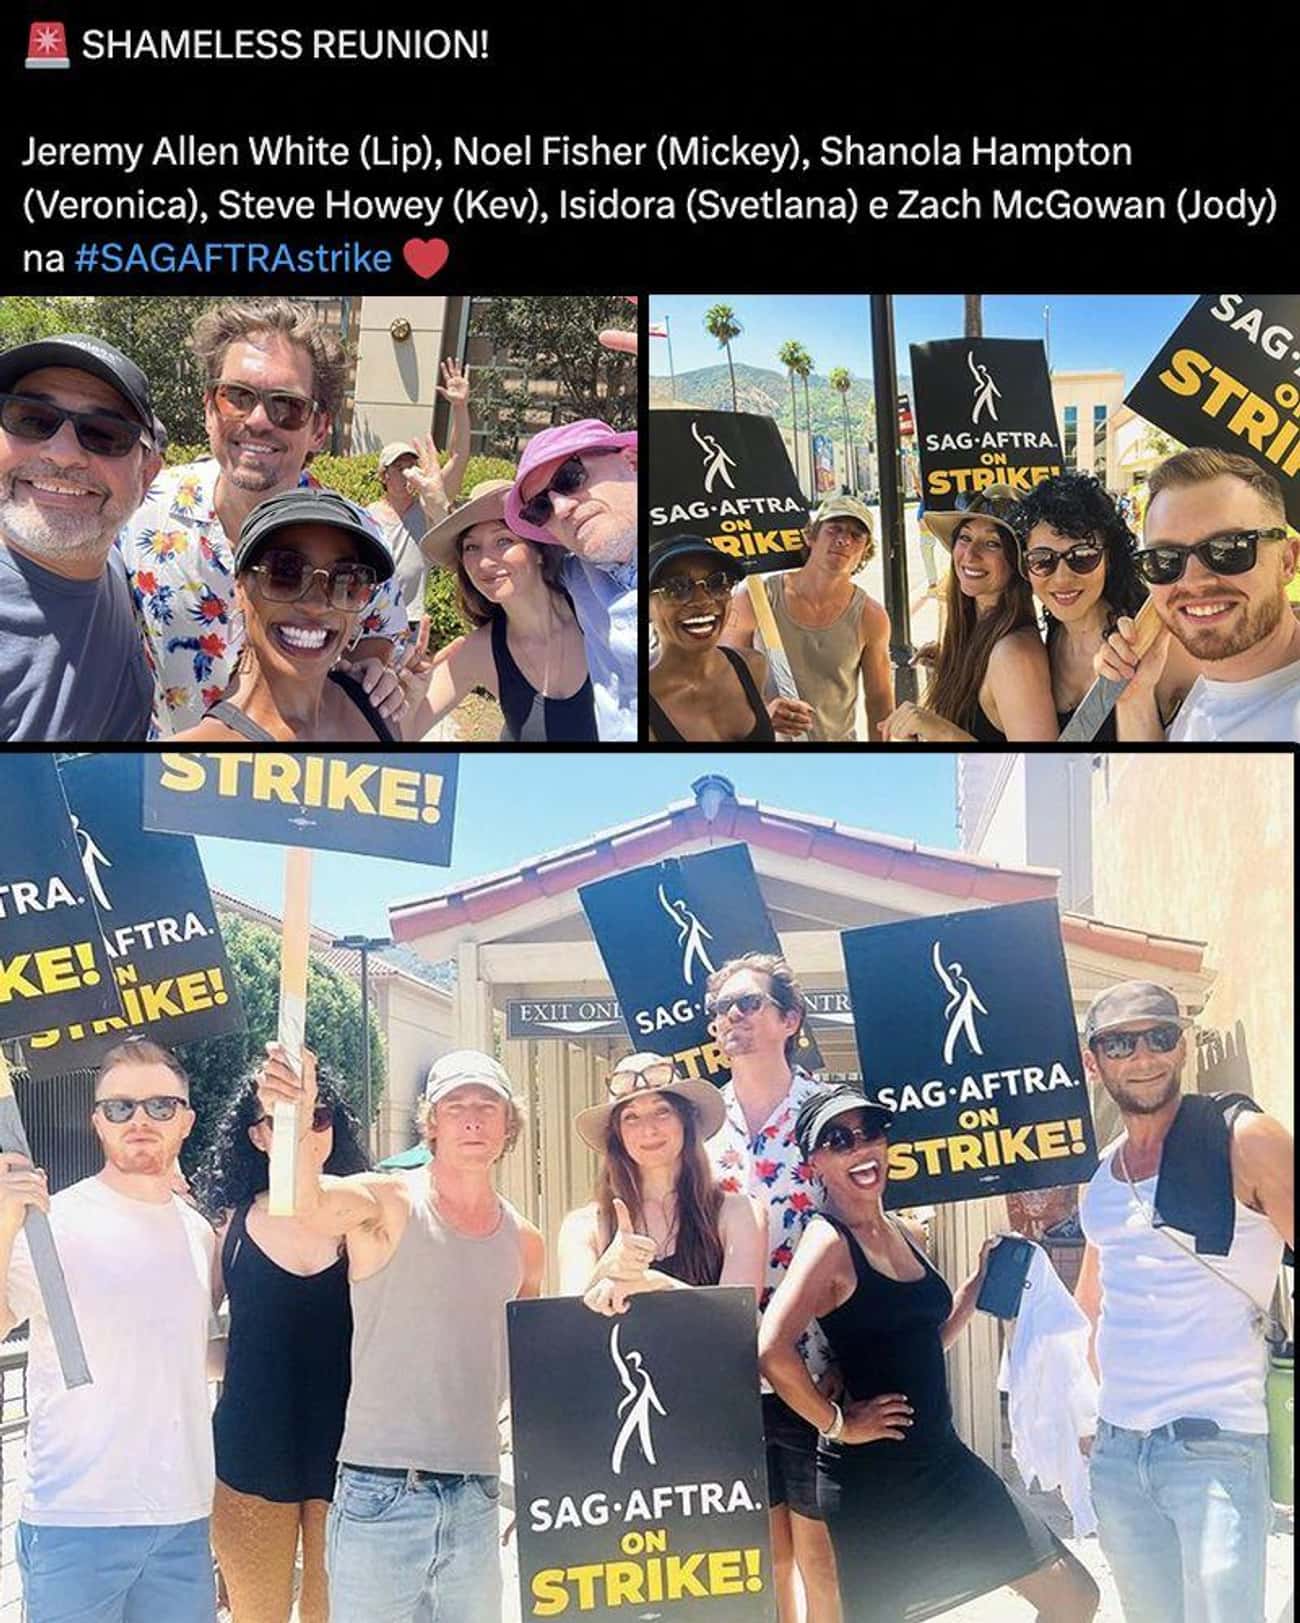 A 'Shameless' Reunion On The Picket Line